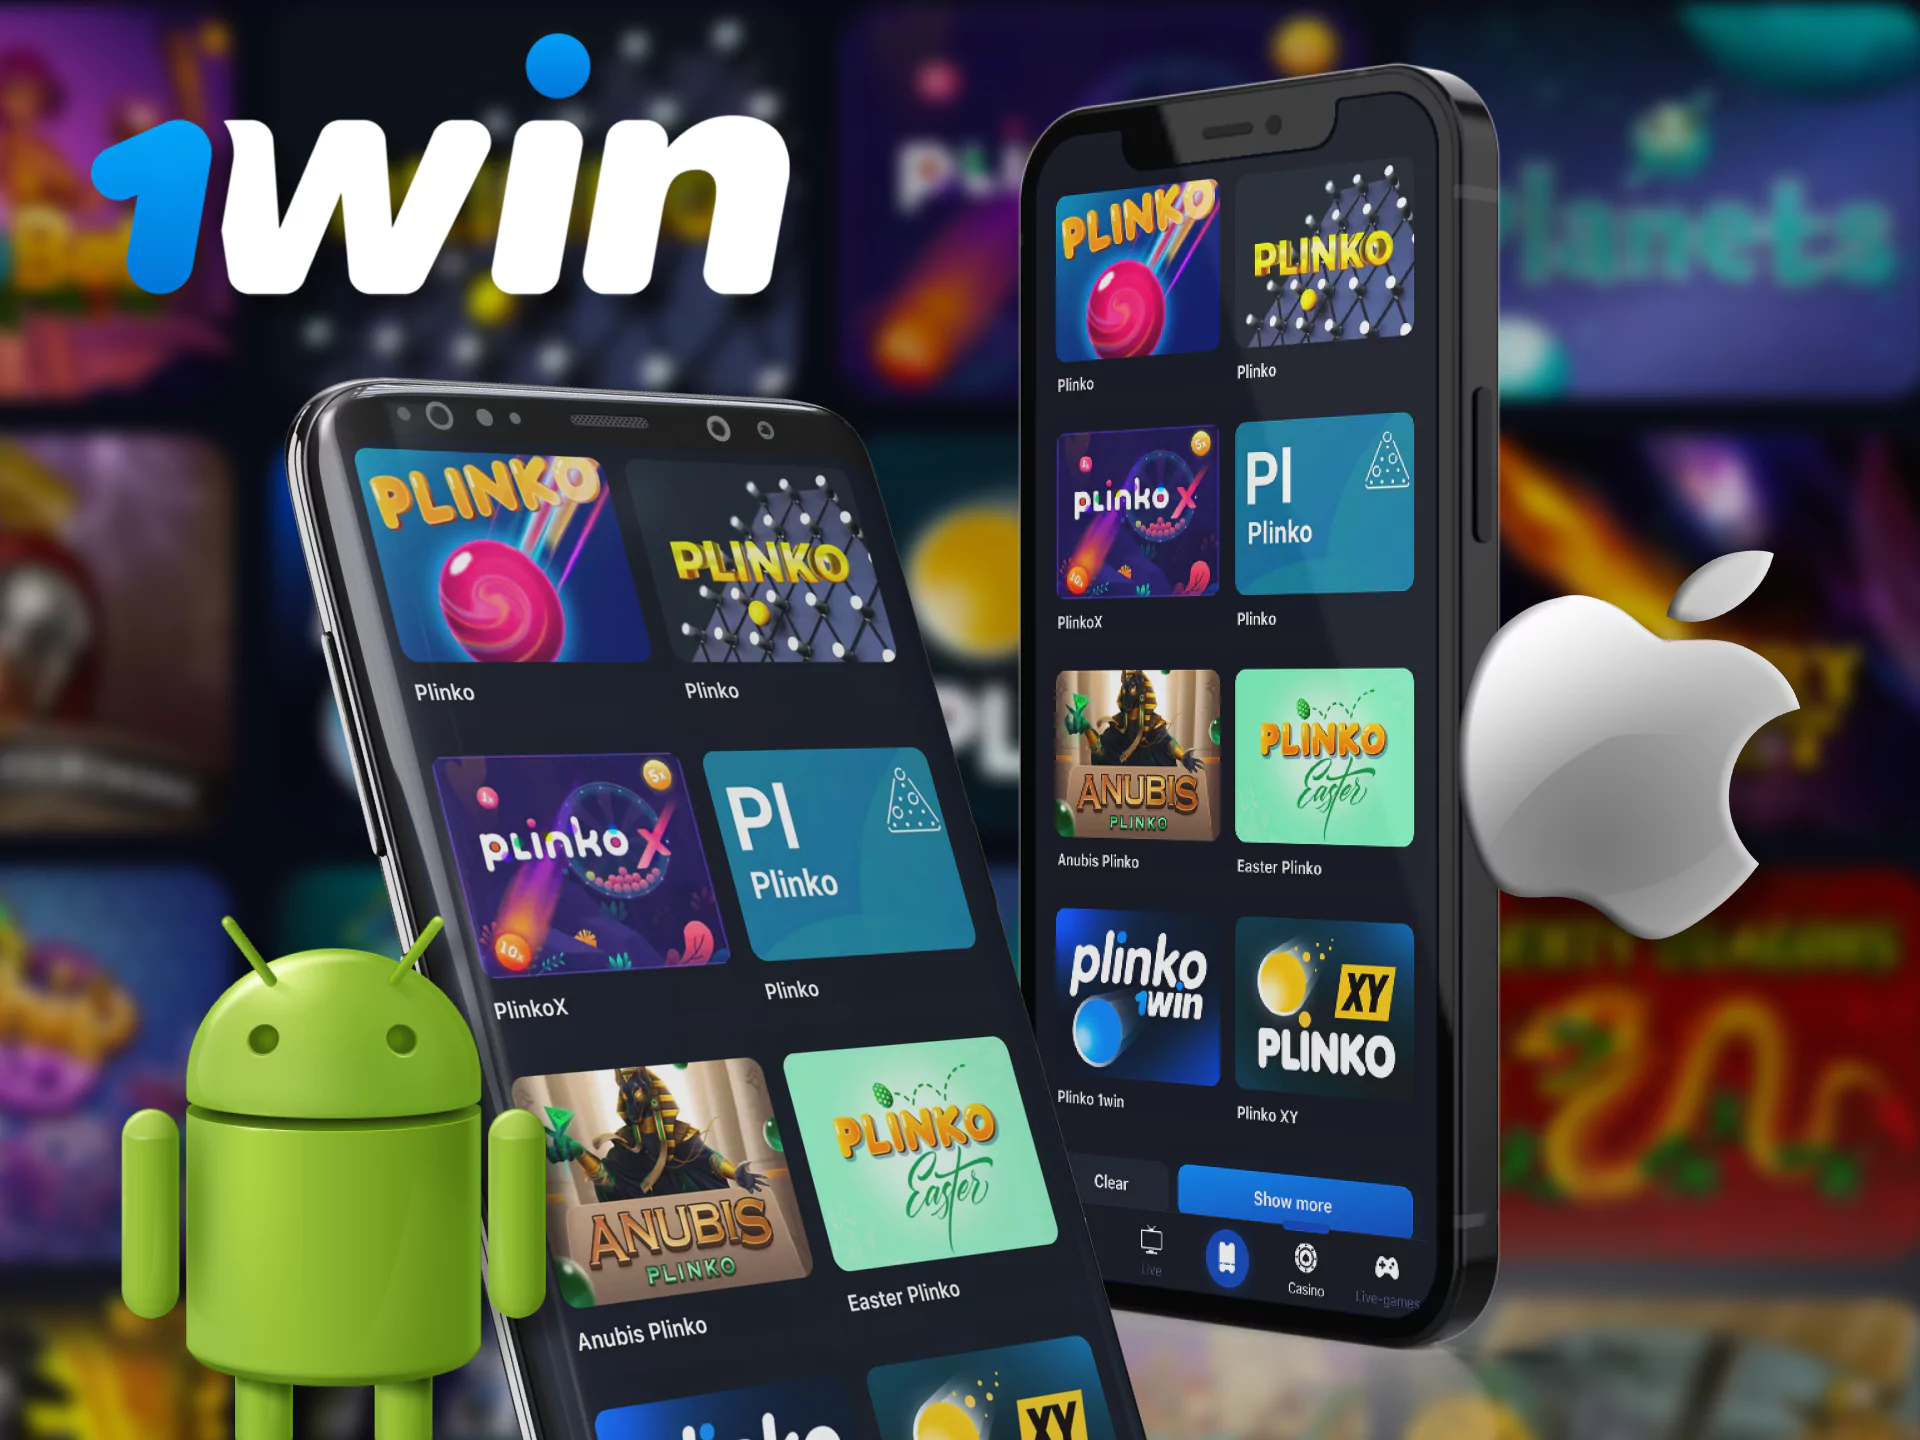 With 1Win, play plinko on your phone through the mobile app.